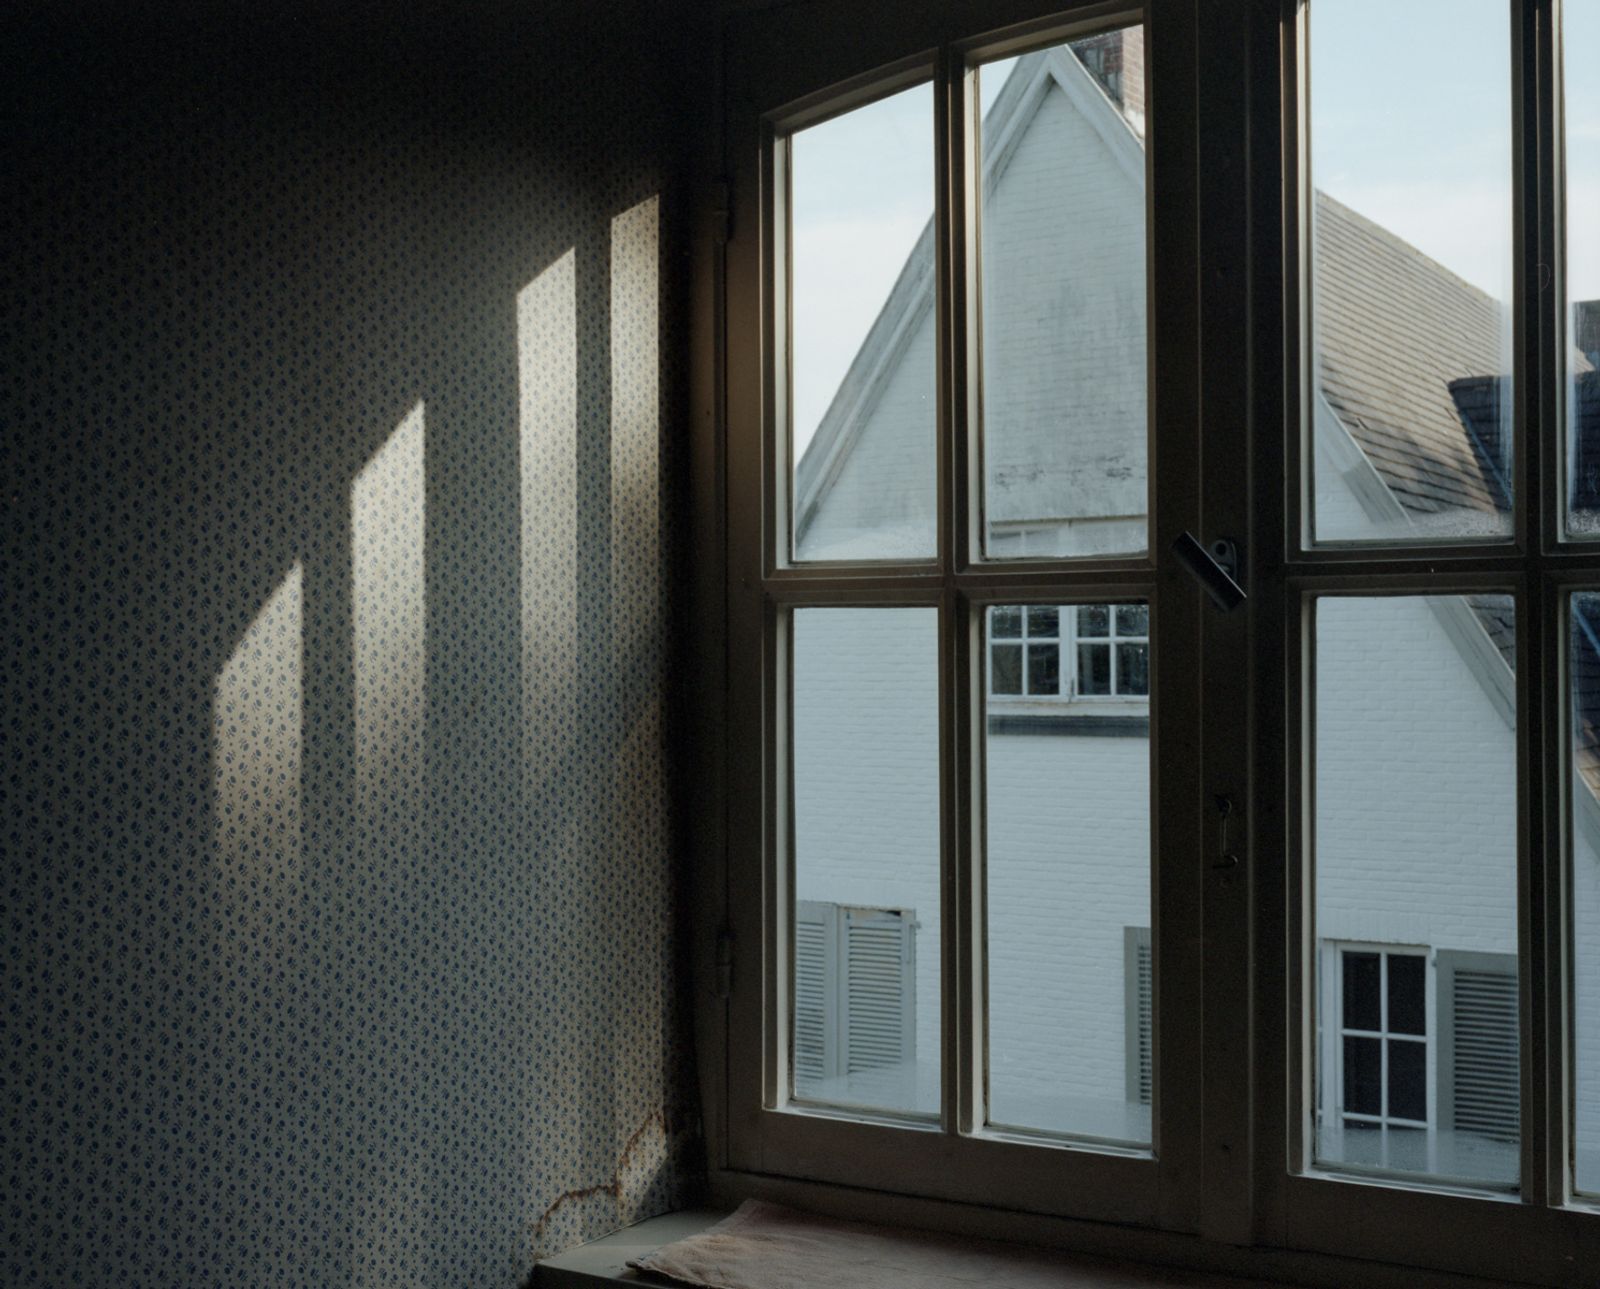 © Wouter Van de Voorde - Image from the Home/Home photography project